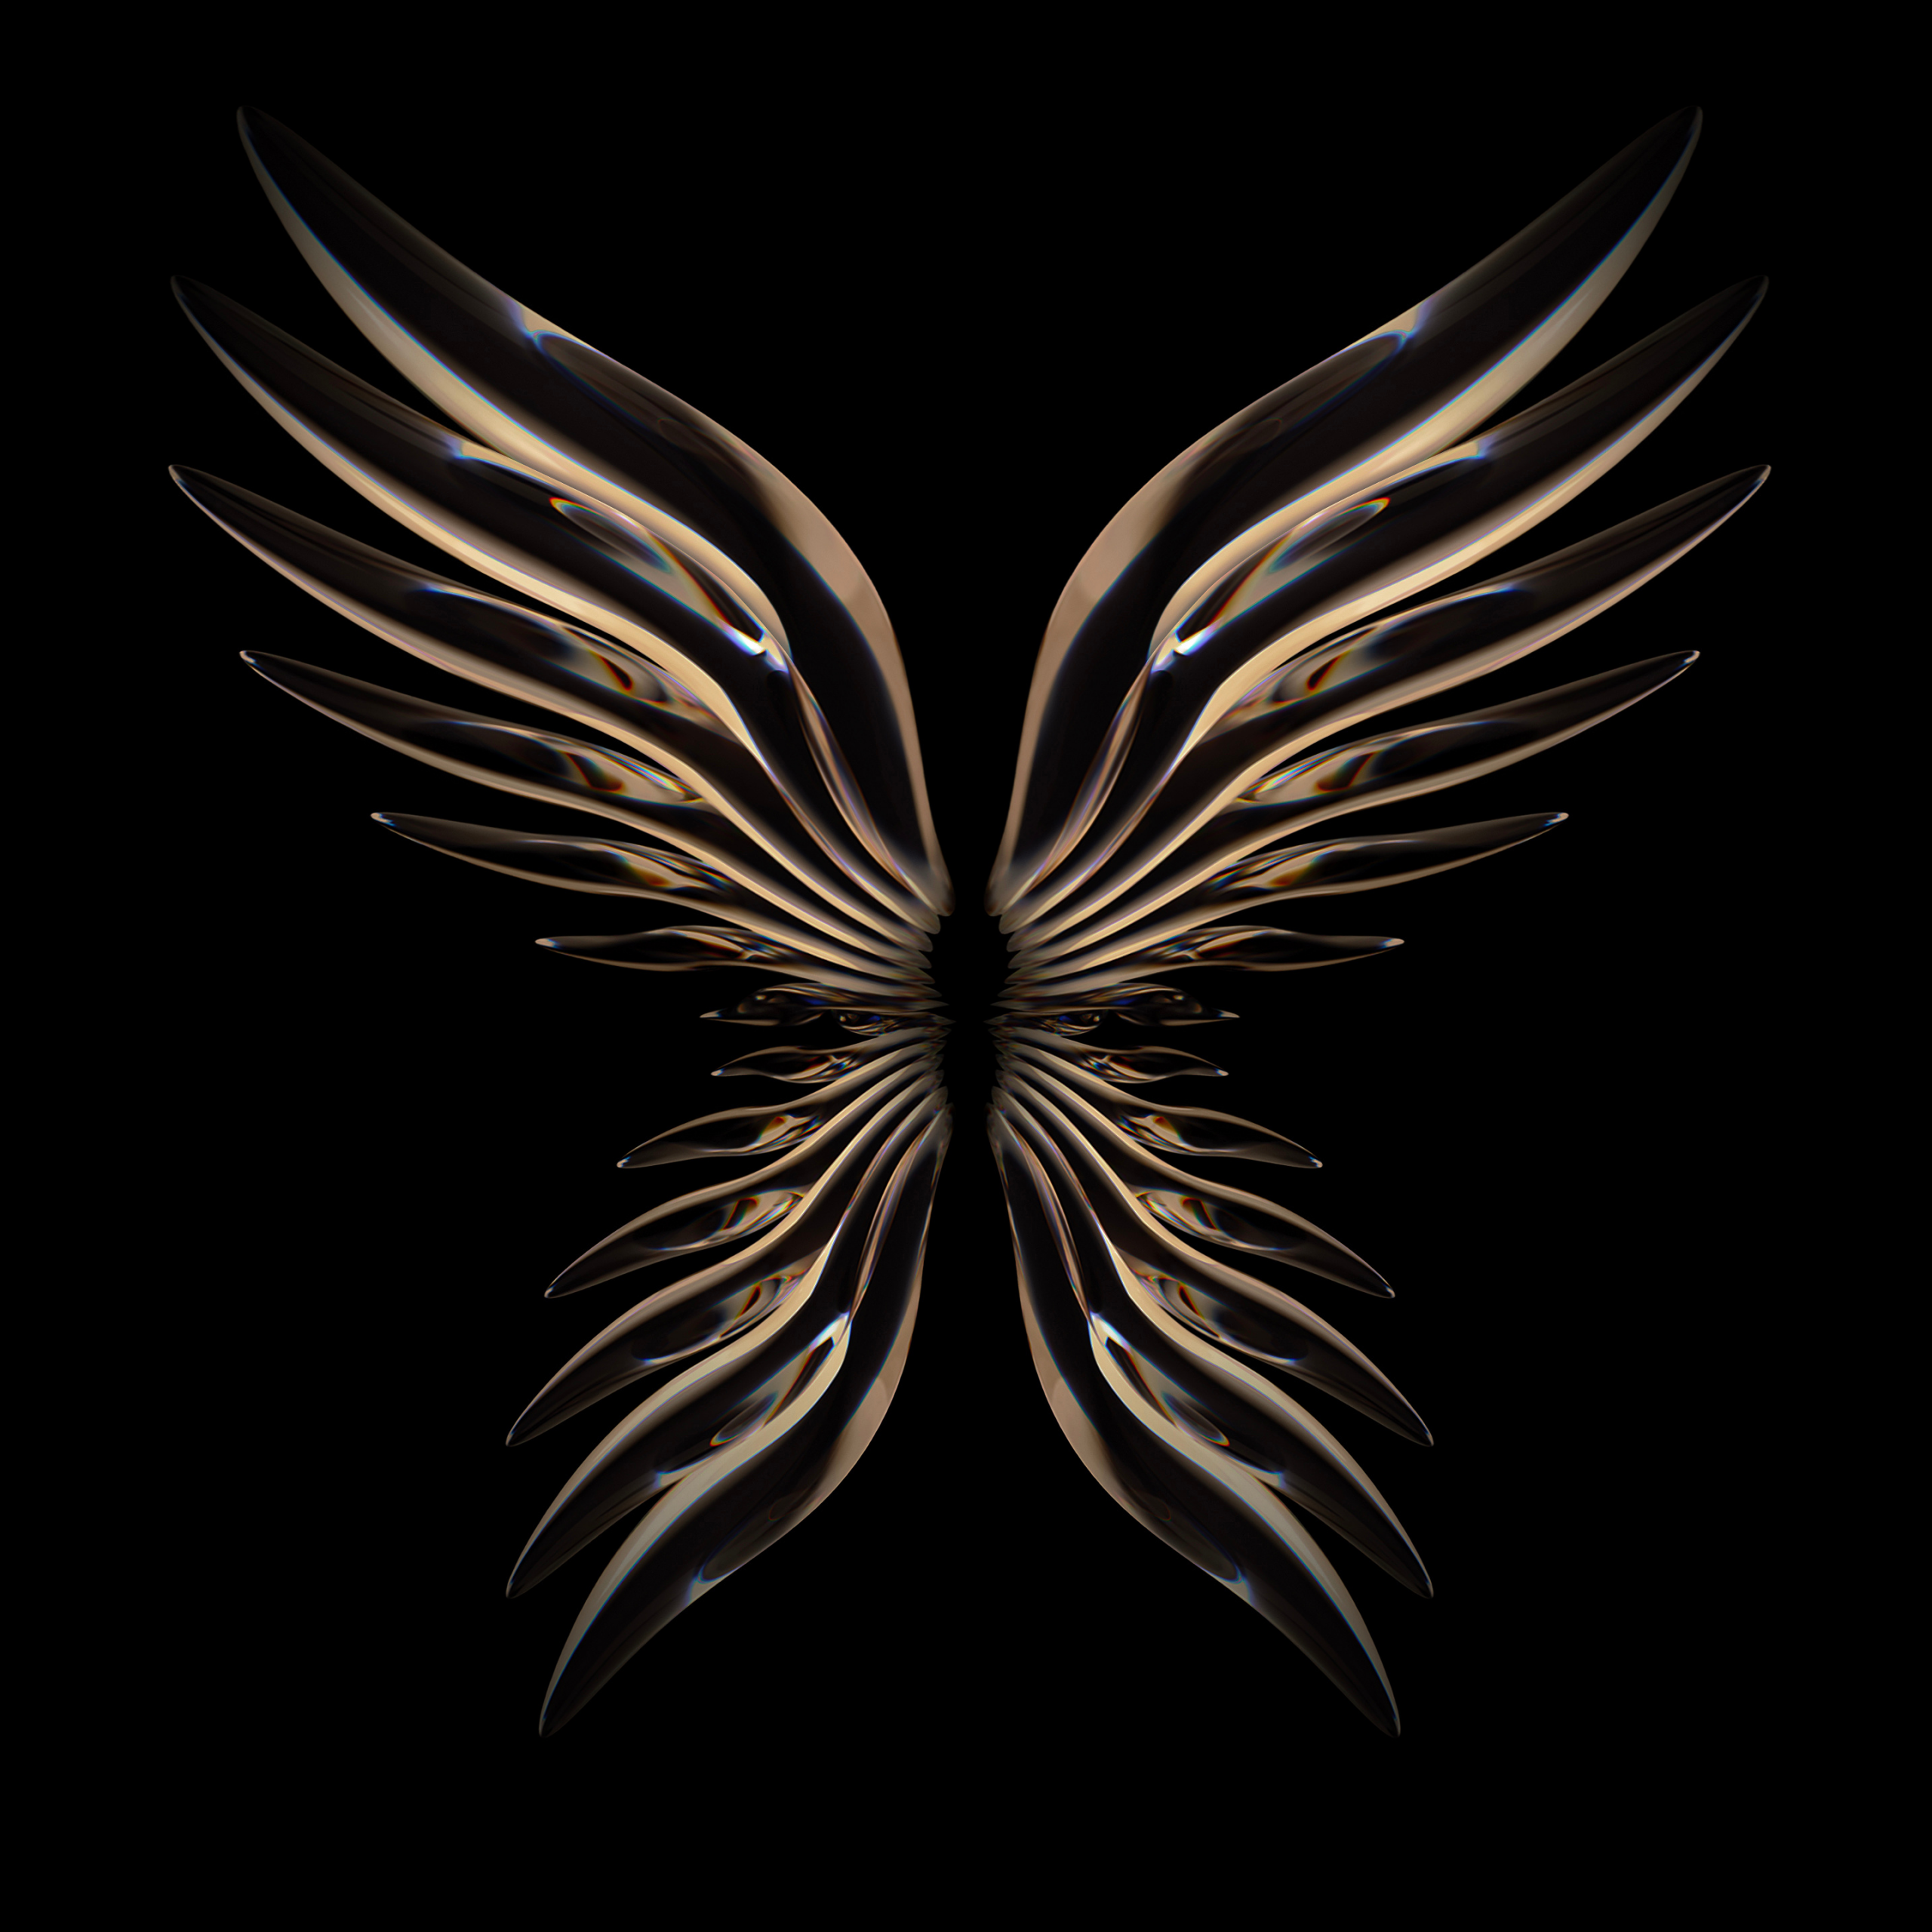 Wings wallpaper by Passion2edit - Download on ZEDGE™ | 9506